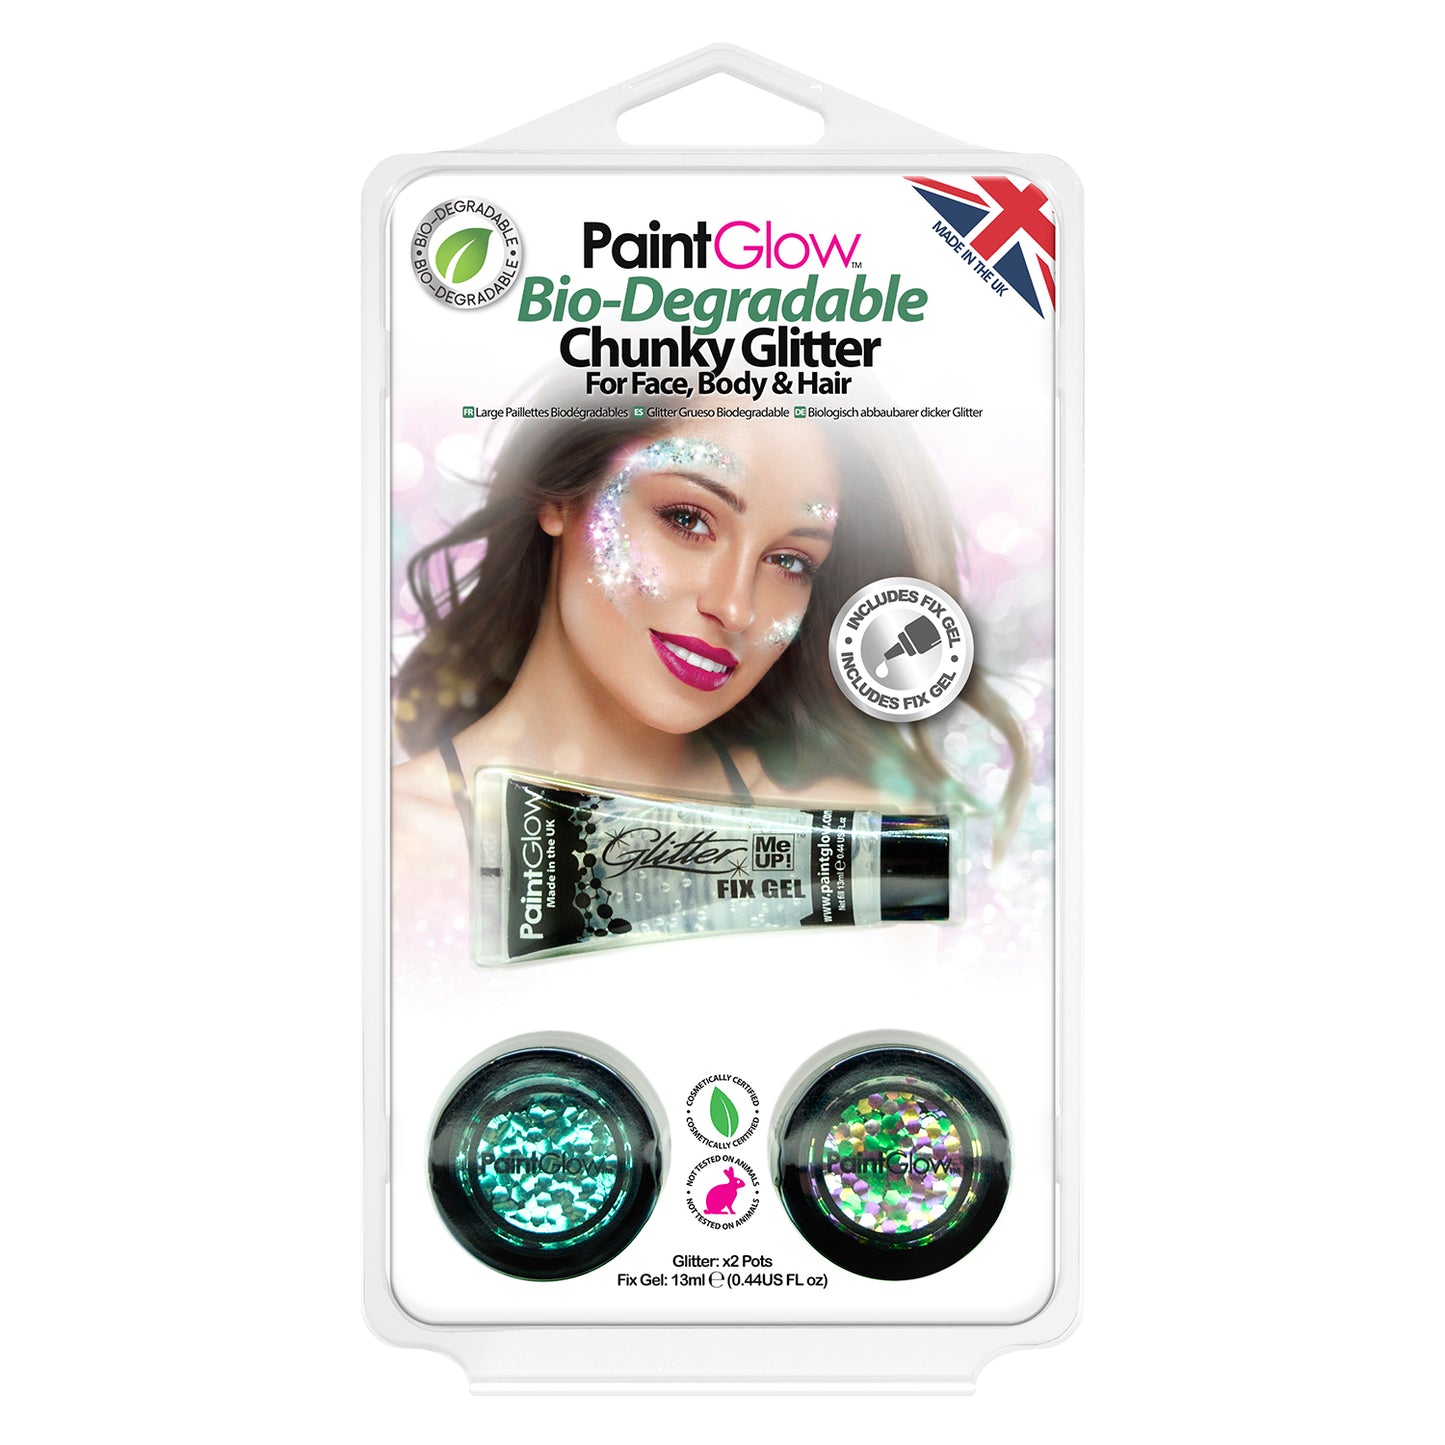 PaintGlow Bio-Degradable Chunky Glitter for Face, Body & Hair (Pack 1)